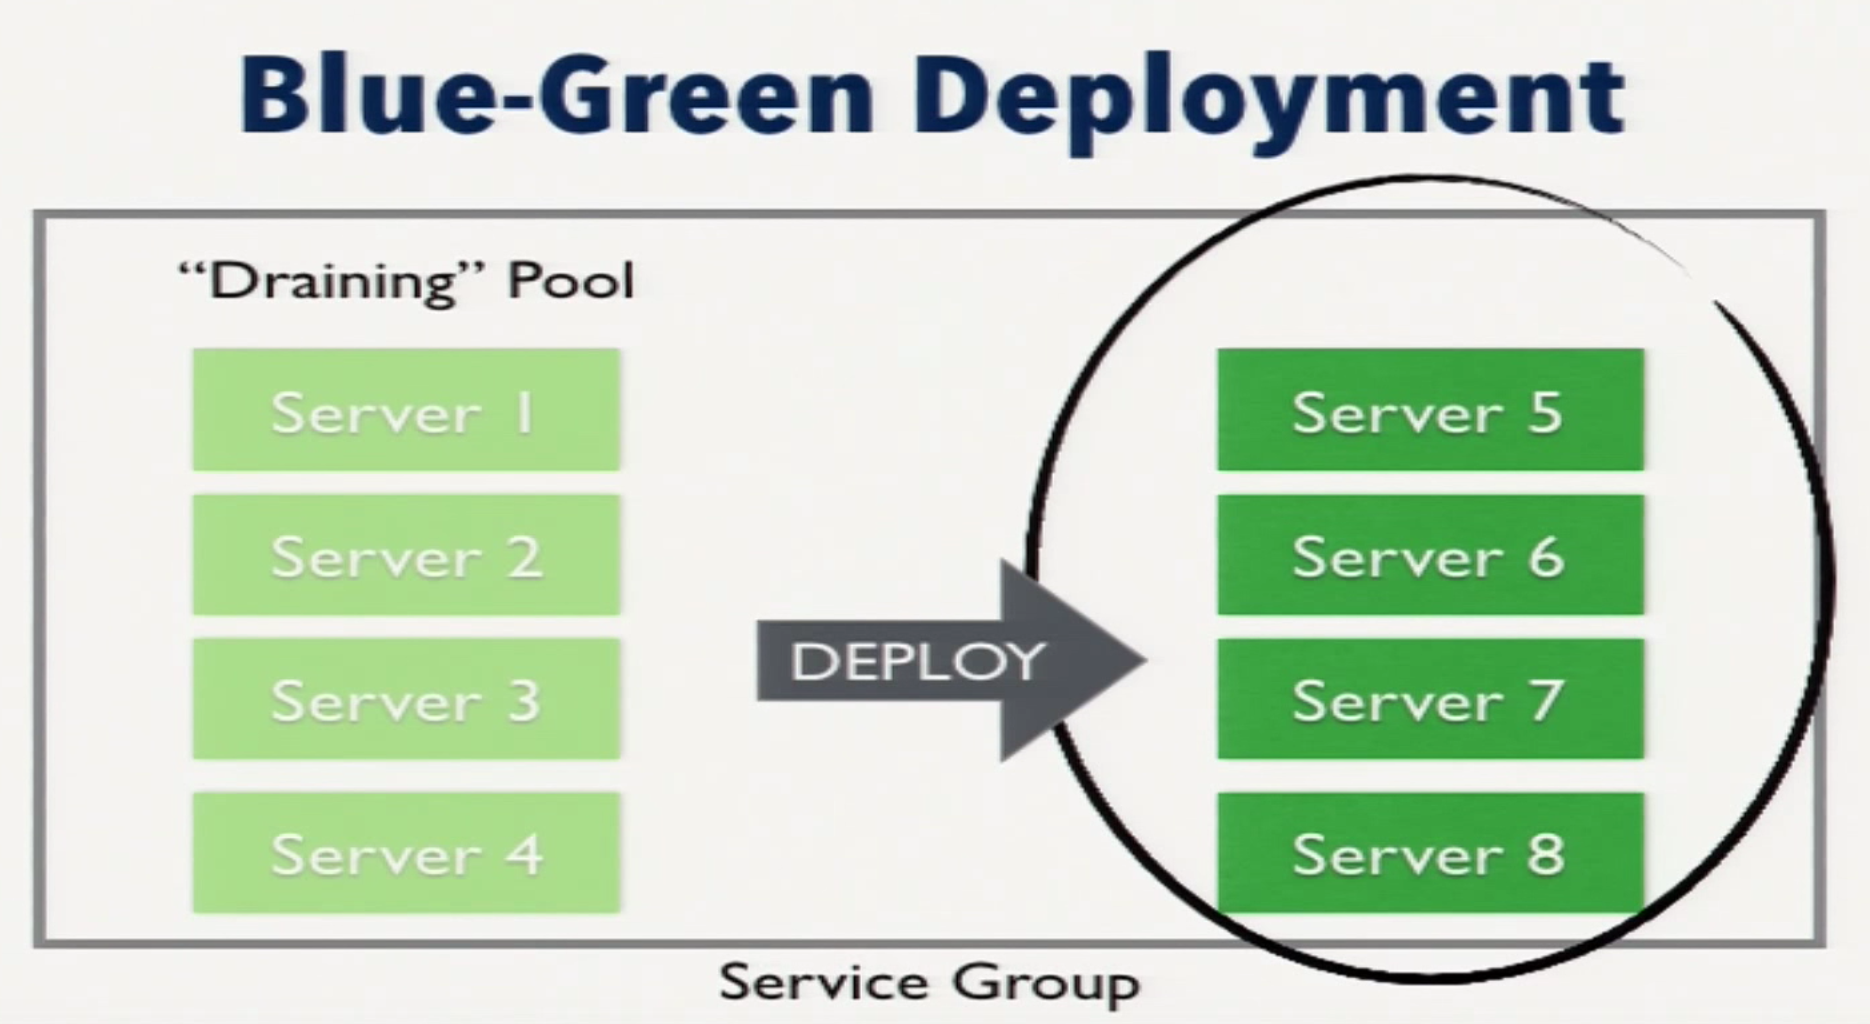 a draining server pool in a blue-green deployment